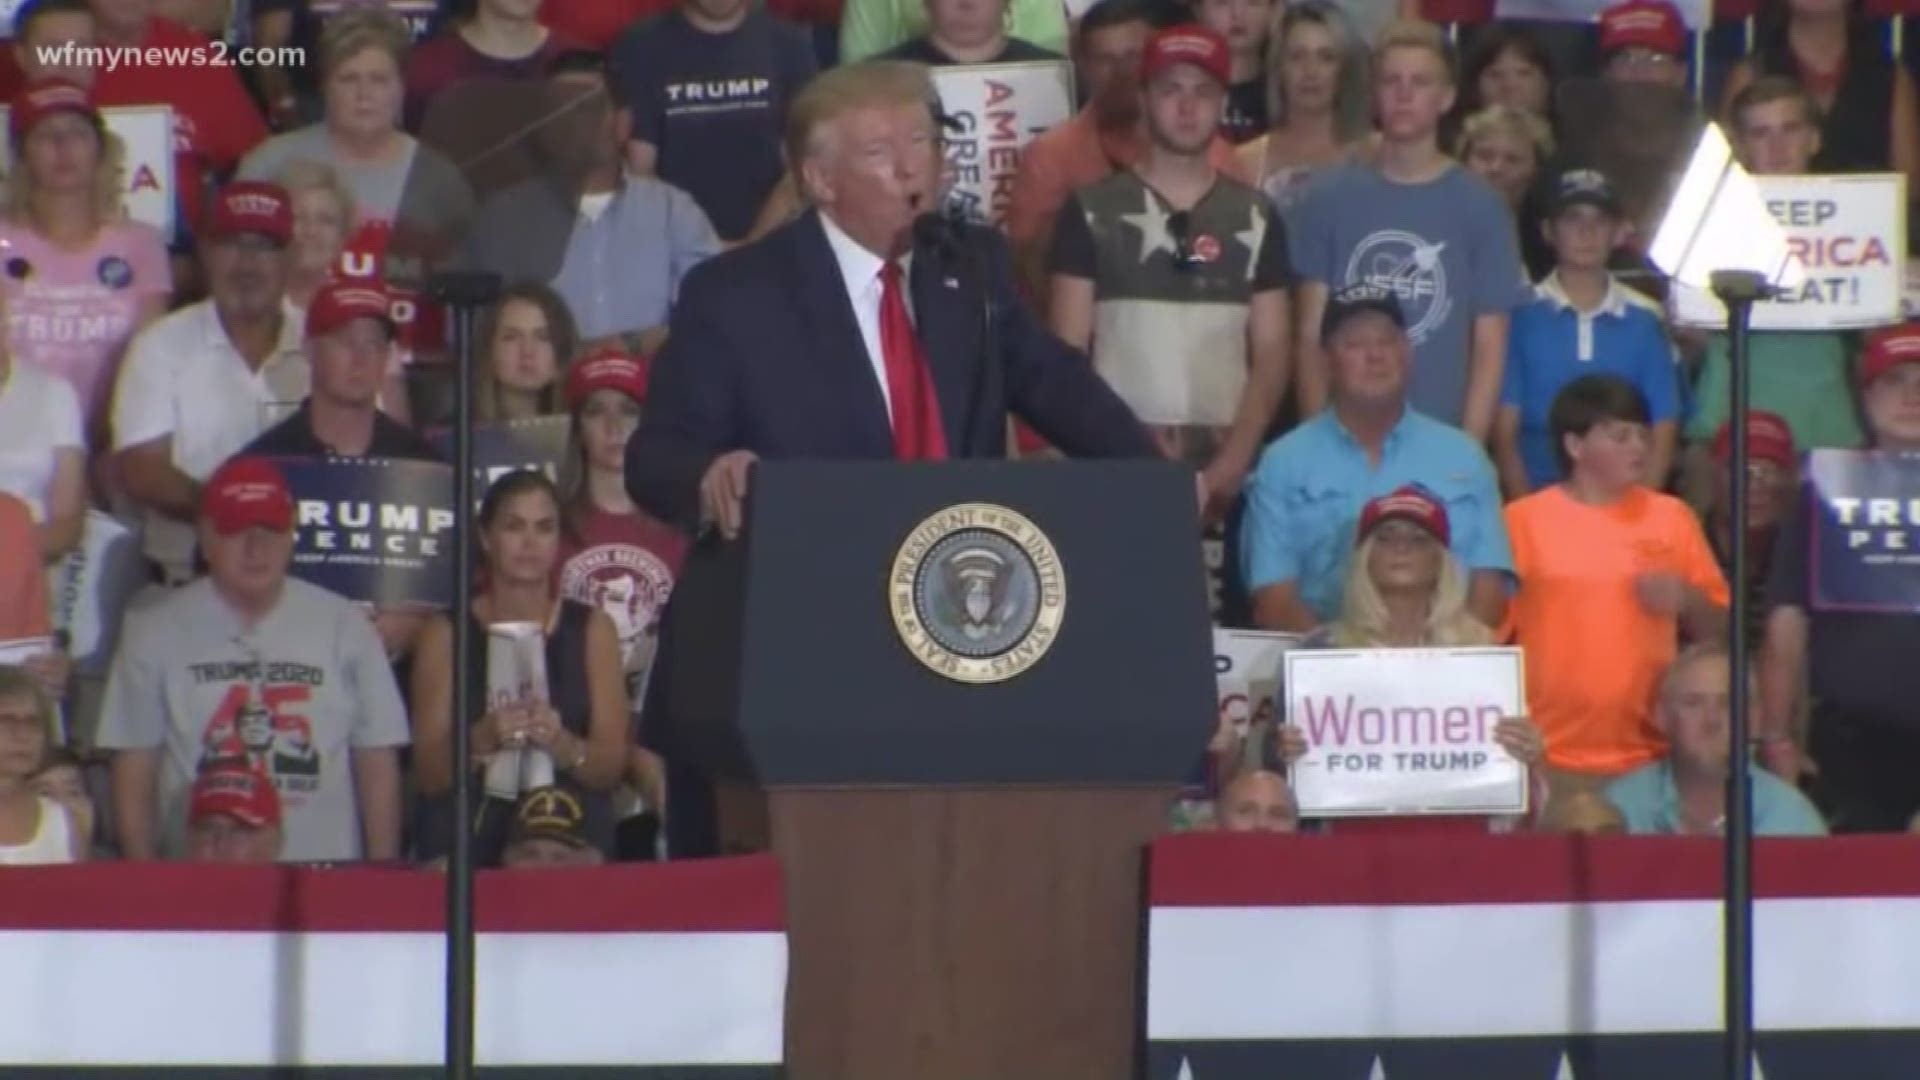 The President made another stop on the campaign trail in North Carolina, ahead of tomorrow’s 9th district election race.